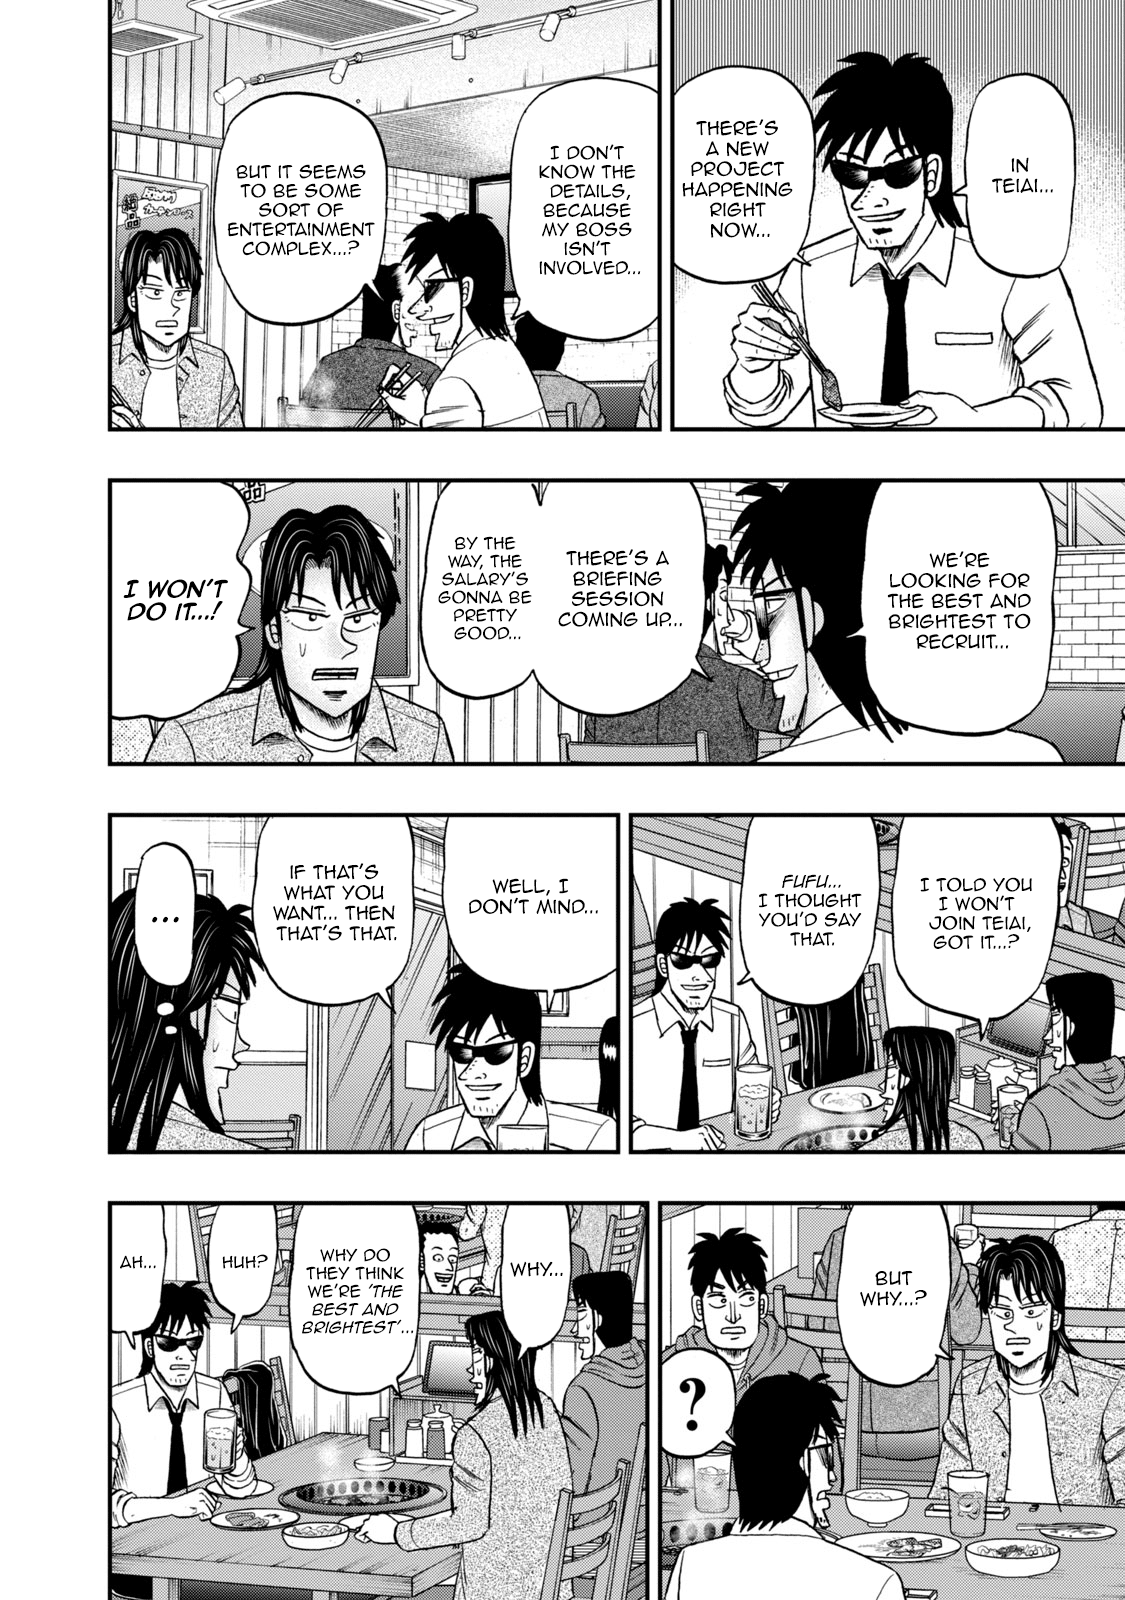 Life In Tokyo Ichijou - Page 4